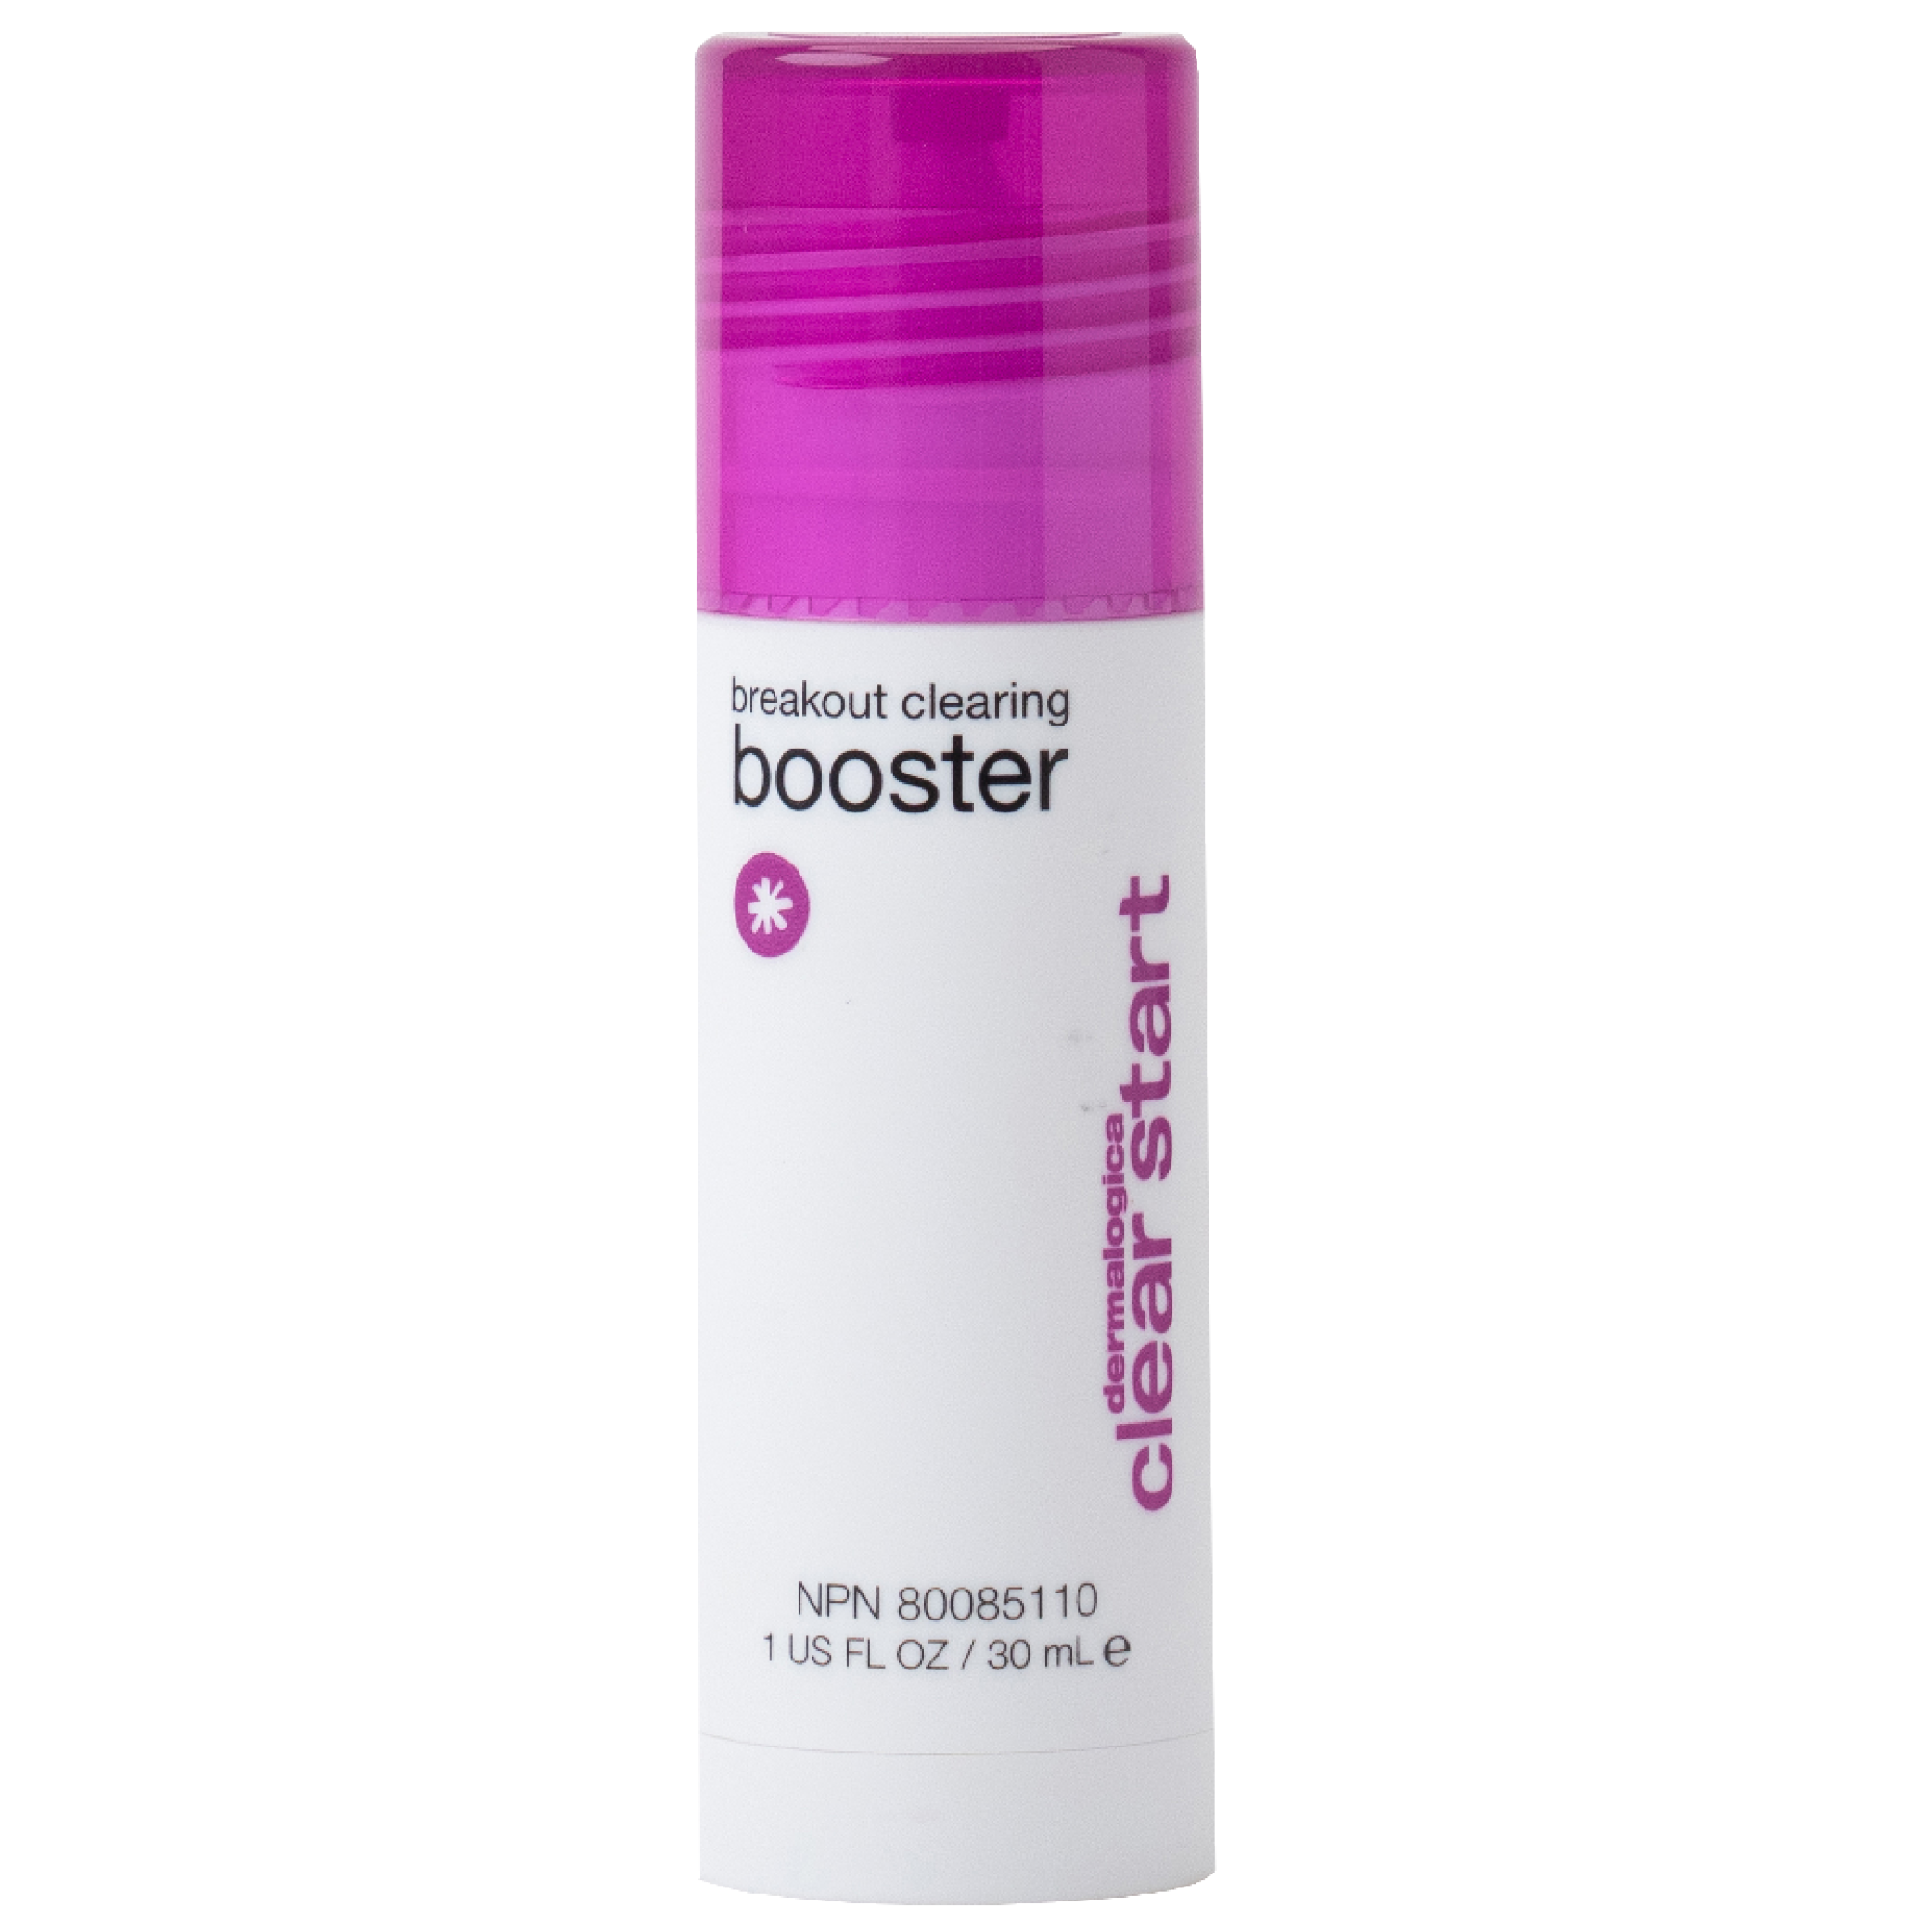 Breakout Clearing Booster, 30 ml